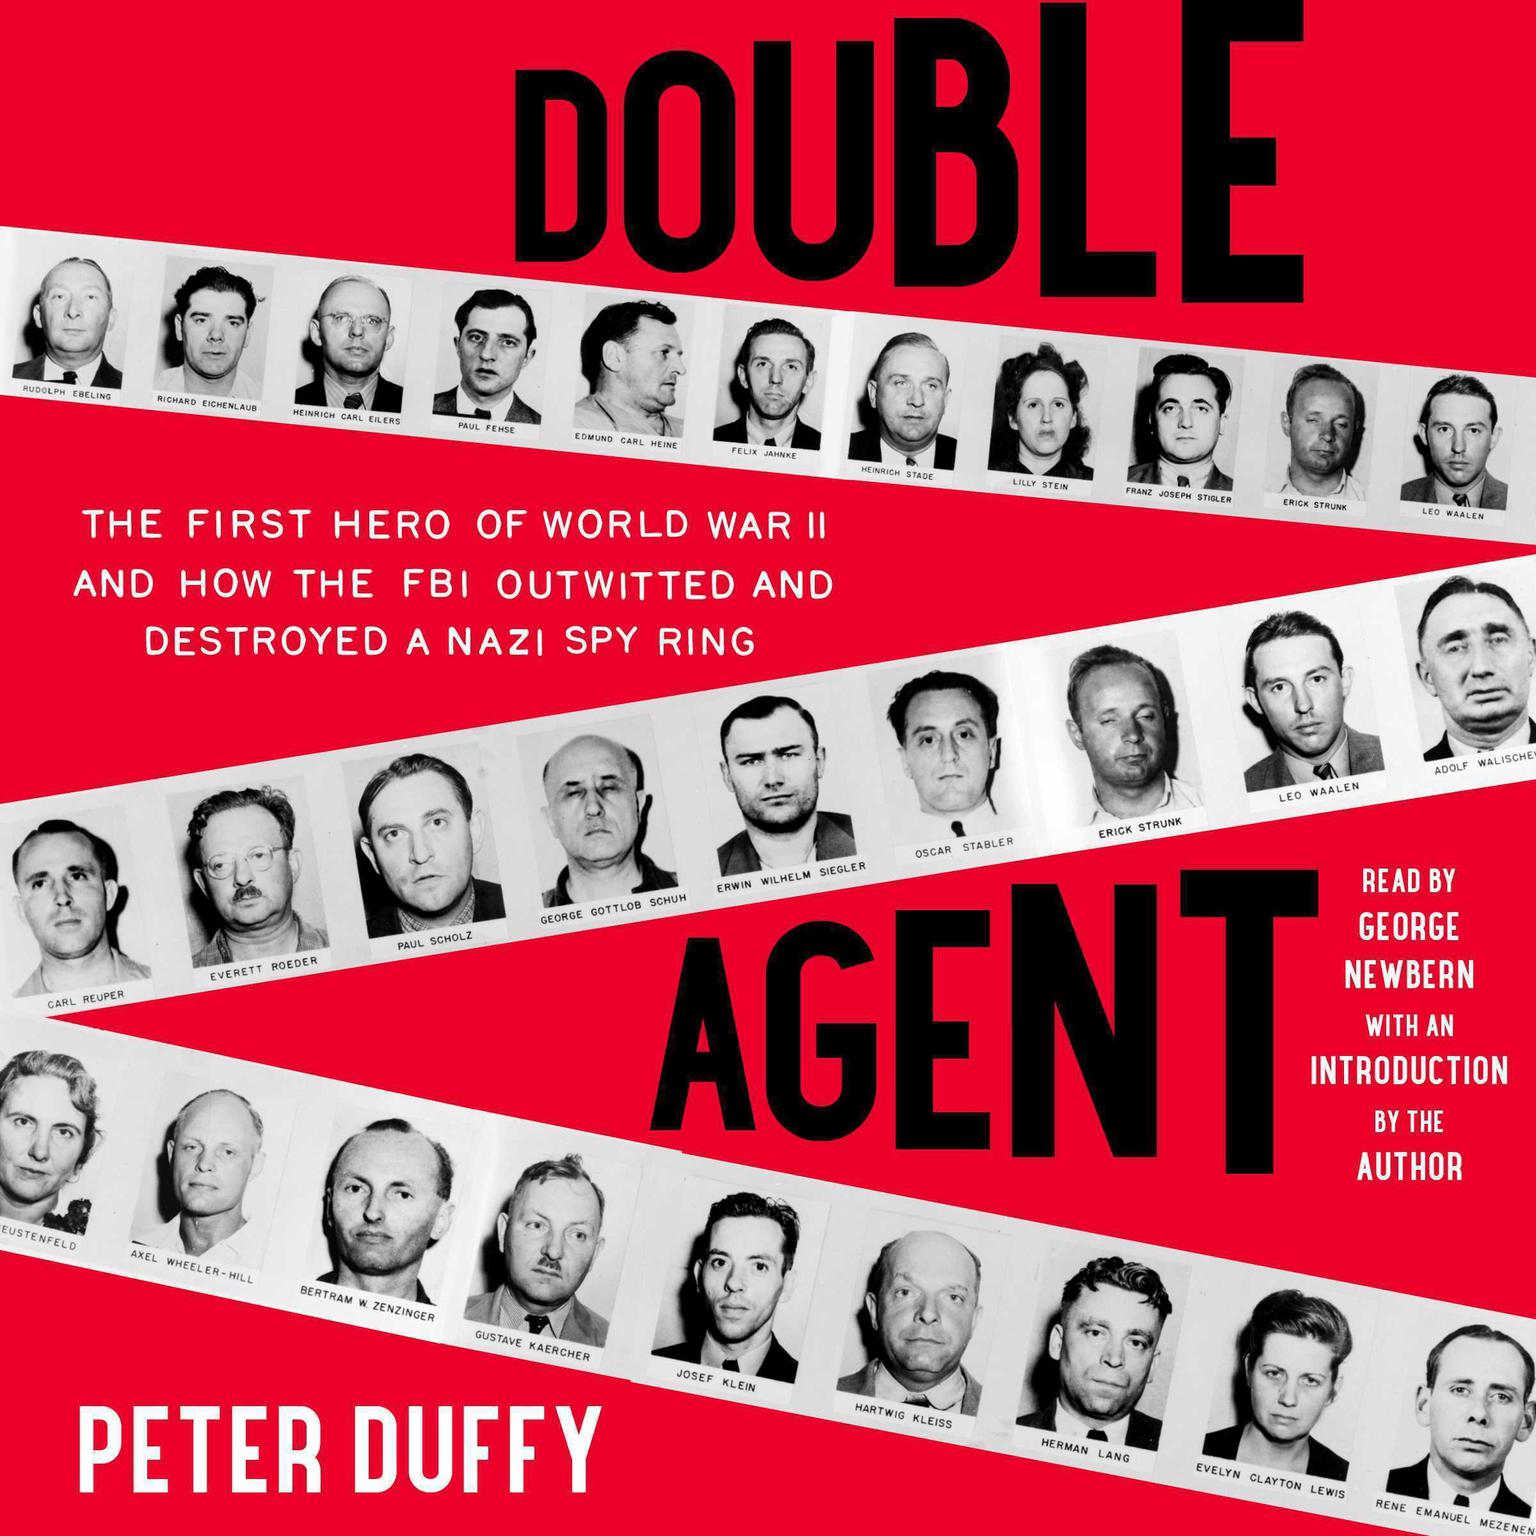 Double Agent: The First Hero of World War II and How the FBI Outwitted and Destroyed a Nazi Spy Ring Audiobook, by Peter Duffy